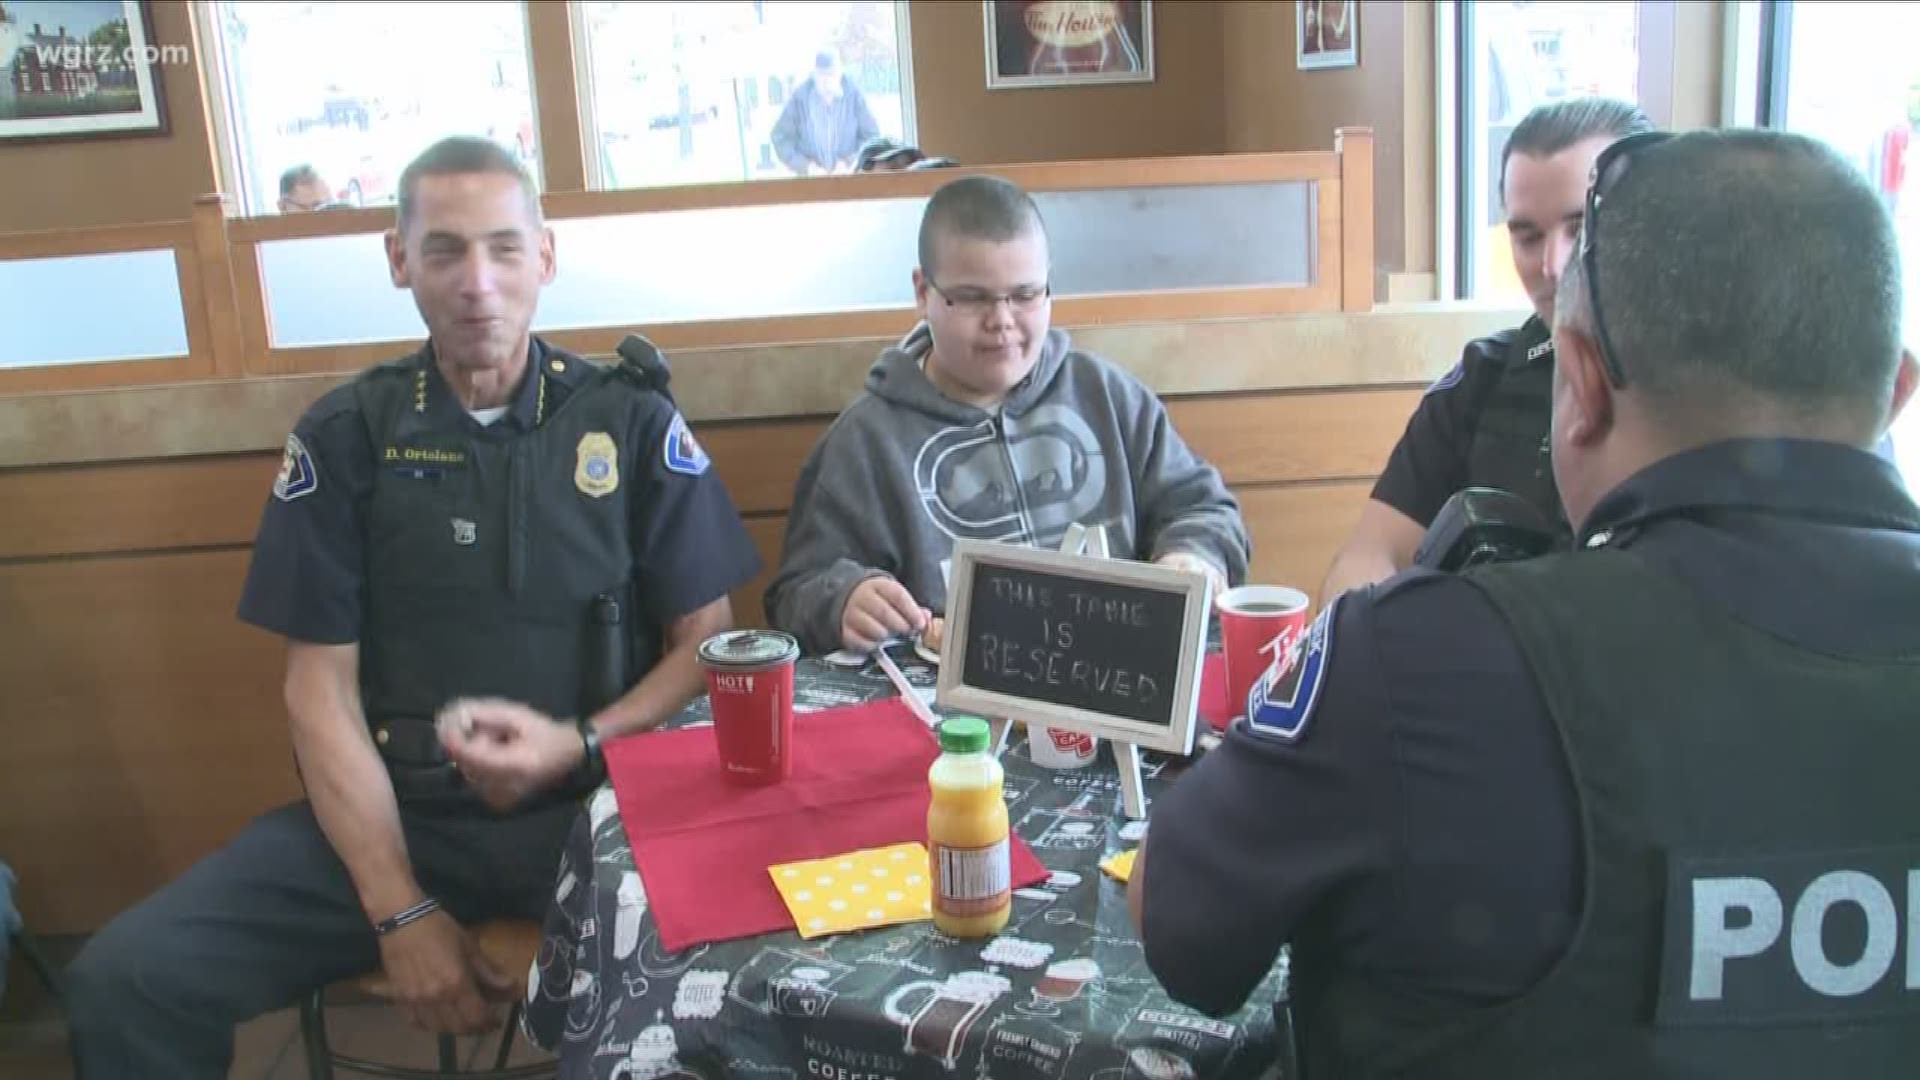 The Dunkirk Police Department is running a new community outreach program to connect with some of the youngest in their community.